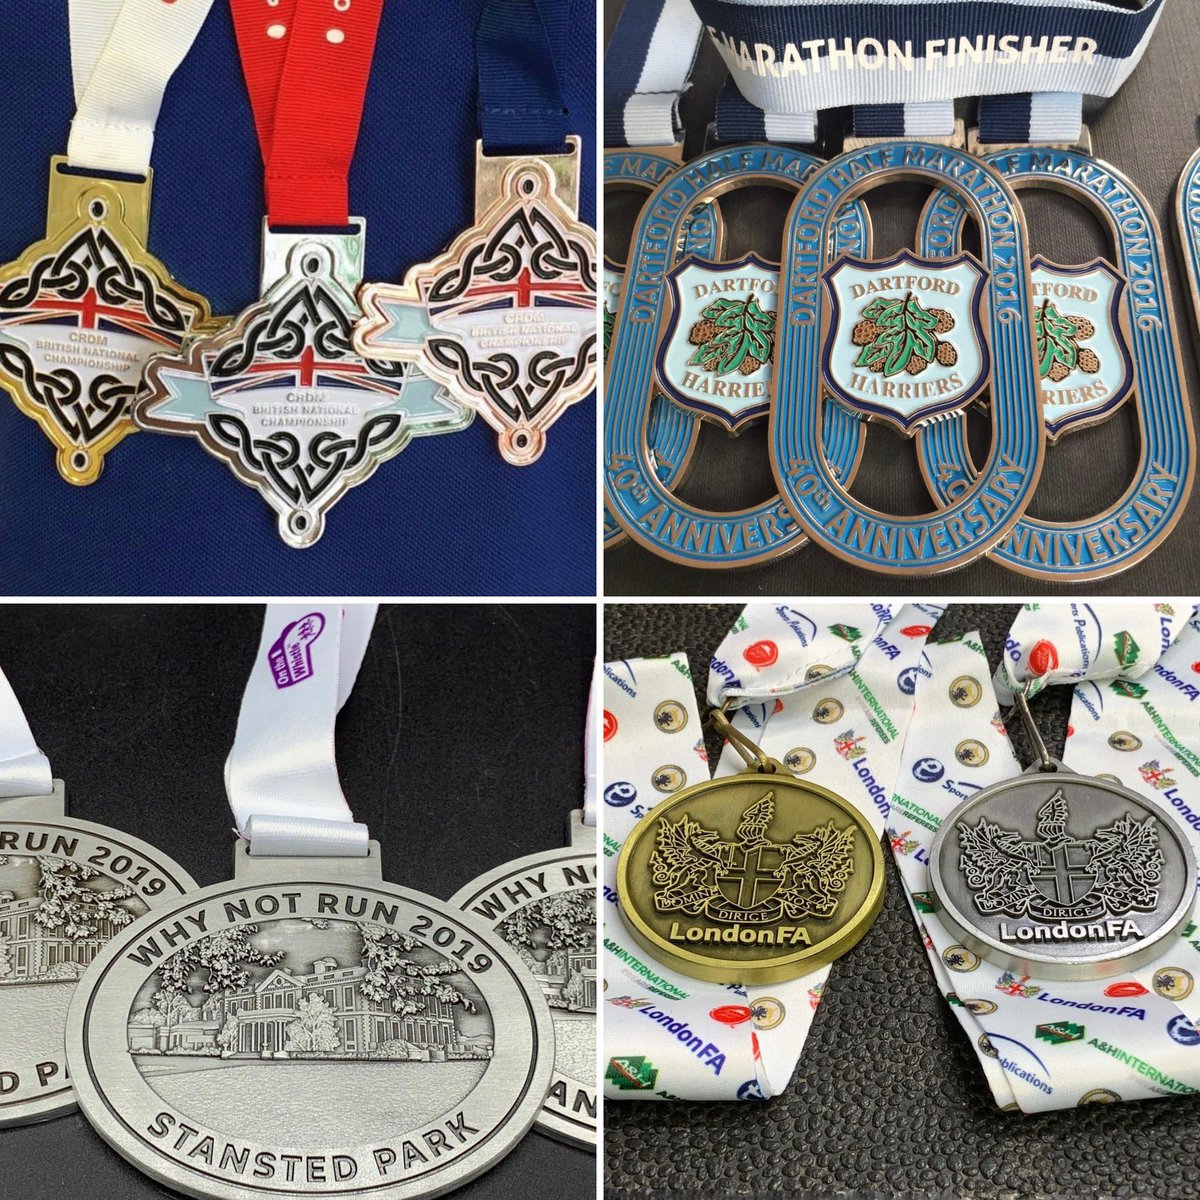 Calling Leagues, Associations & Clubs: If you are looking for a completely bespoke made medal to wow the participants of your competitions or your club members, then speak to us, we can quote and get the process going. Have your top quality medals in just 5-6 weeks 🥇